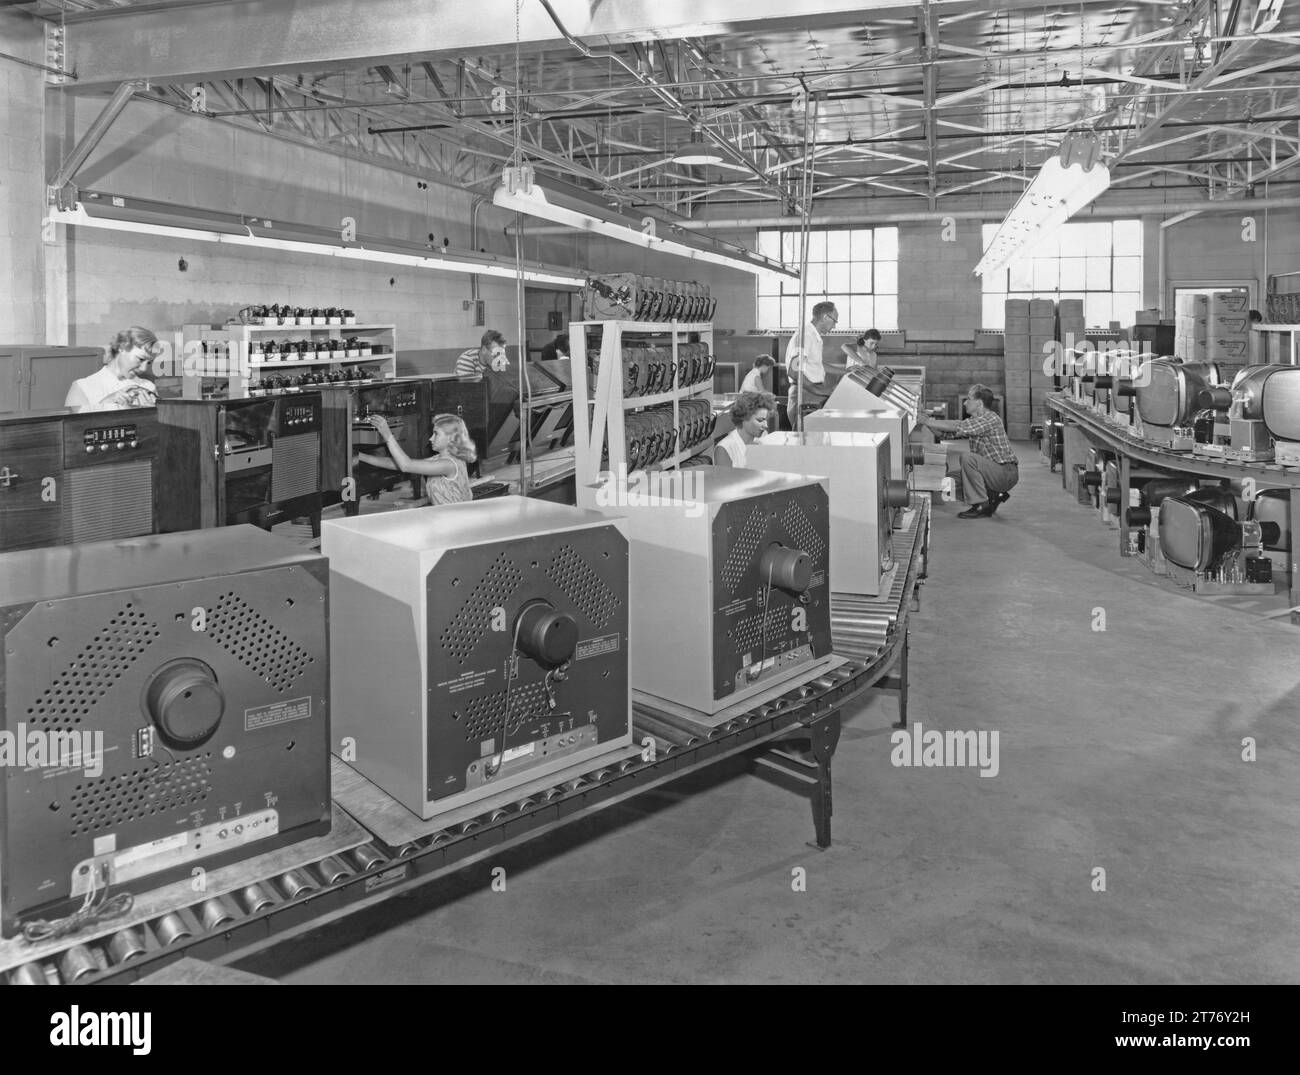 Workers on the production line at a manufacturer of home-entertainment electrical goods in the USA c.1960. The central conveyor has televisions being assembled (unusually housed in a metal casing). The monitor screens (CRTs) that are assembled into the outer units of the TVs are on the right. On the left the production line is turning out radiograms or consoles, wooden units with legs. The record player/changer units are stacked next to the line. In the far right boxes in the corner indicate that these components were supplied by V-M (‘Voice of Music’) of Benton Harbor, Michigan. Stock Photo